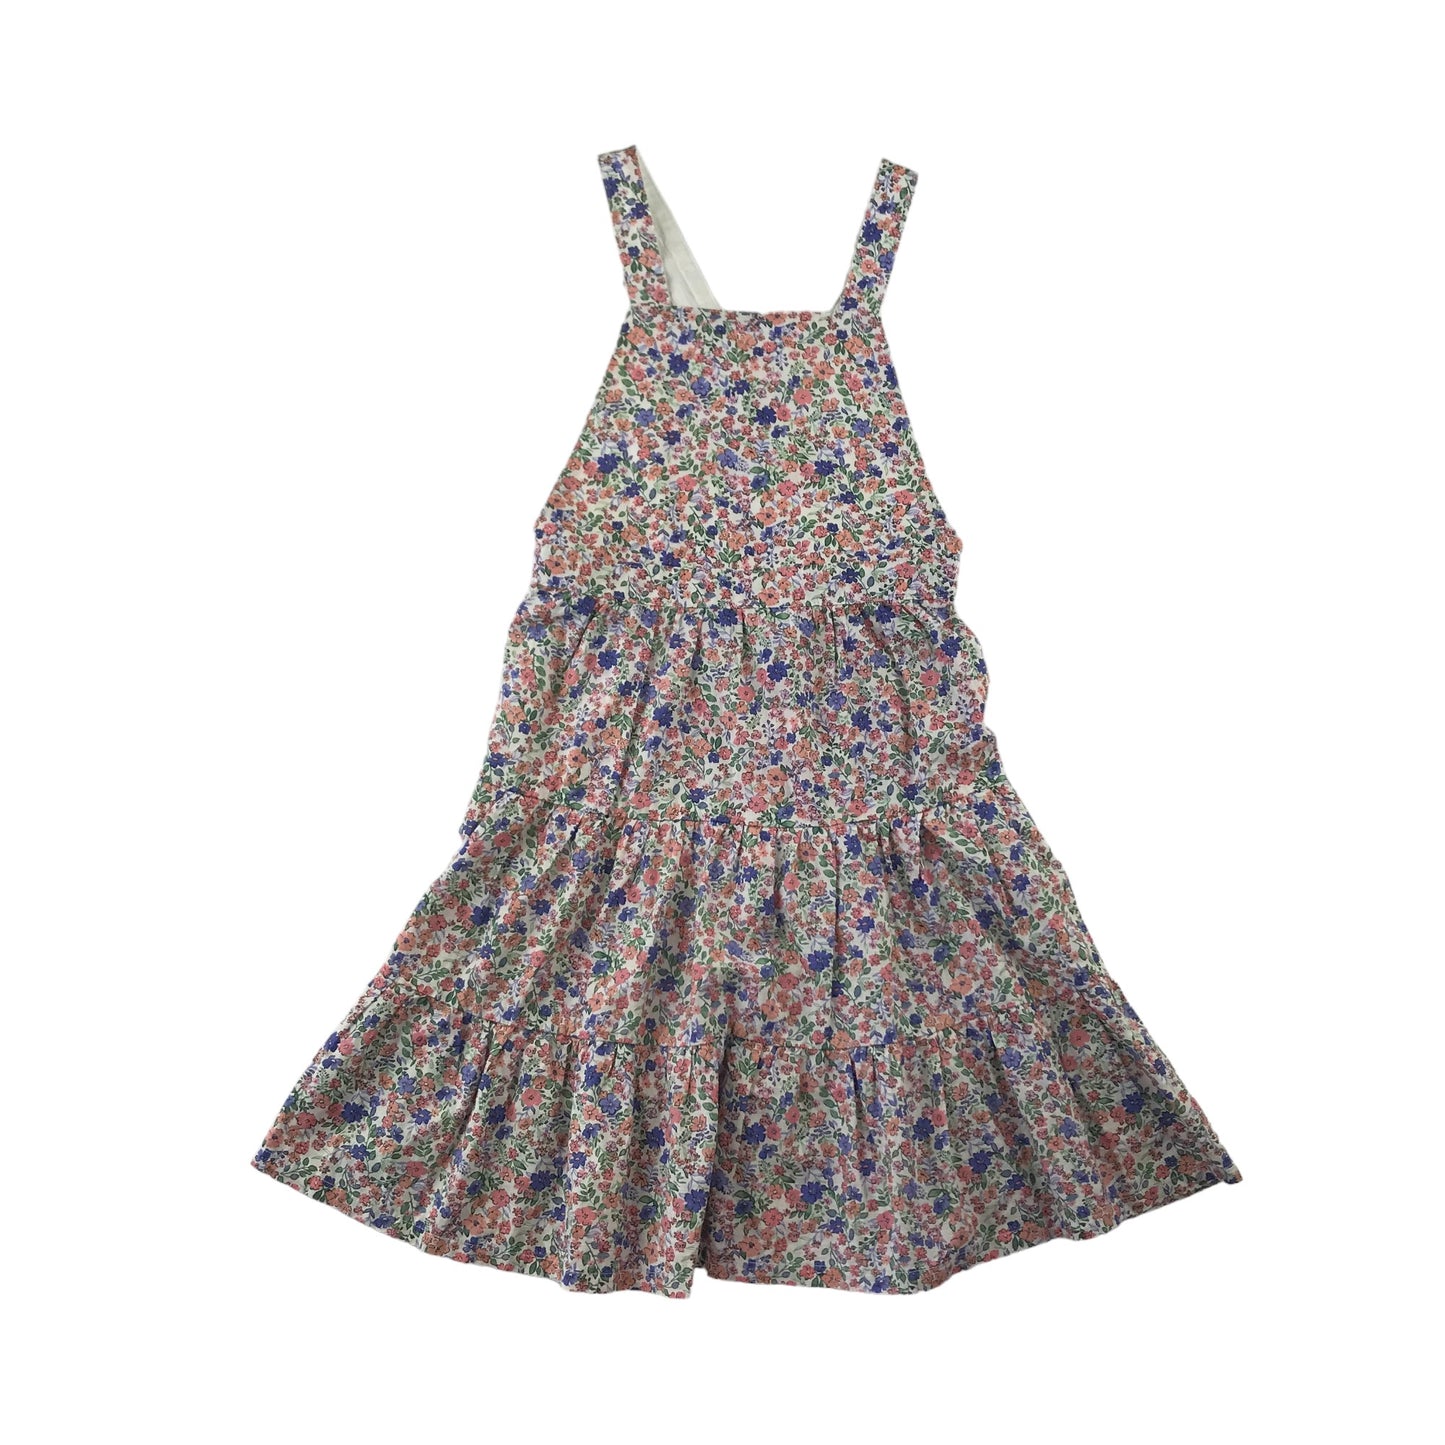 H&M dress 8-9 years blue and pink floral pinafore style flared summery cotton